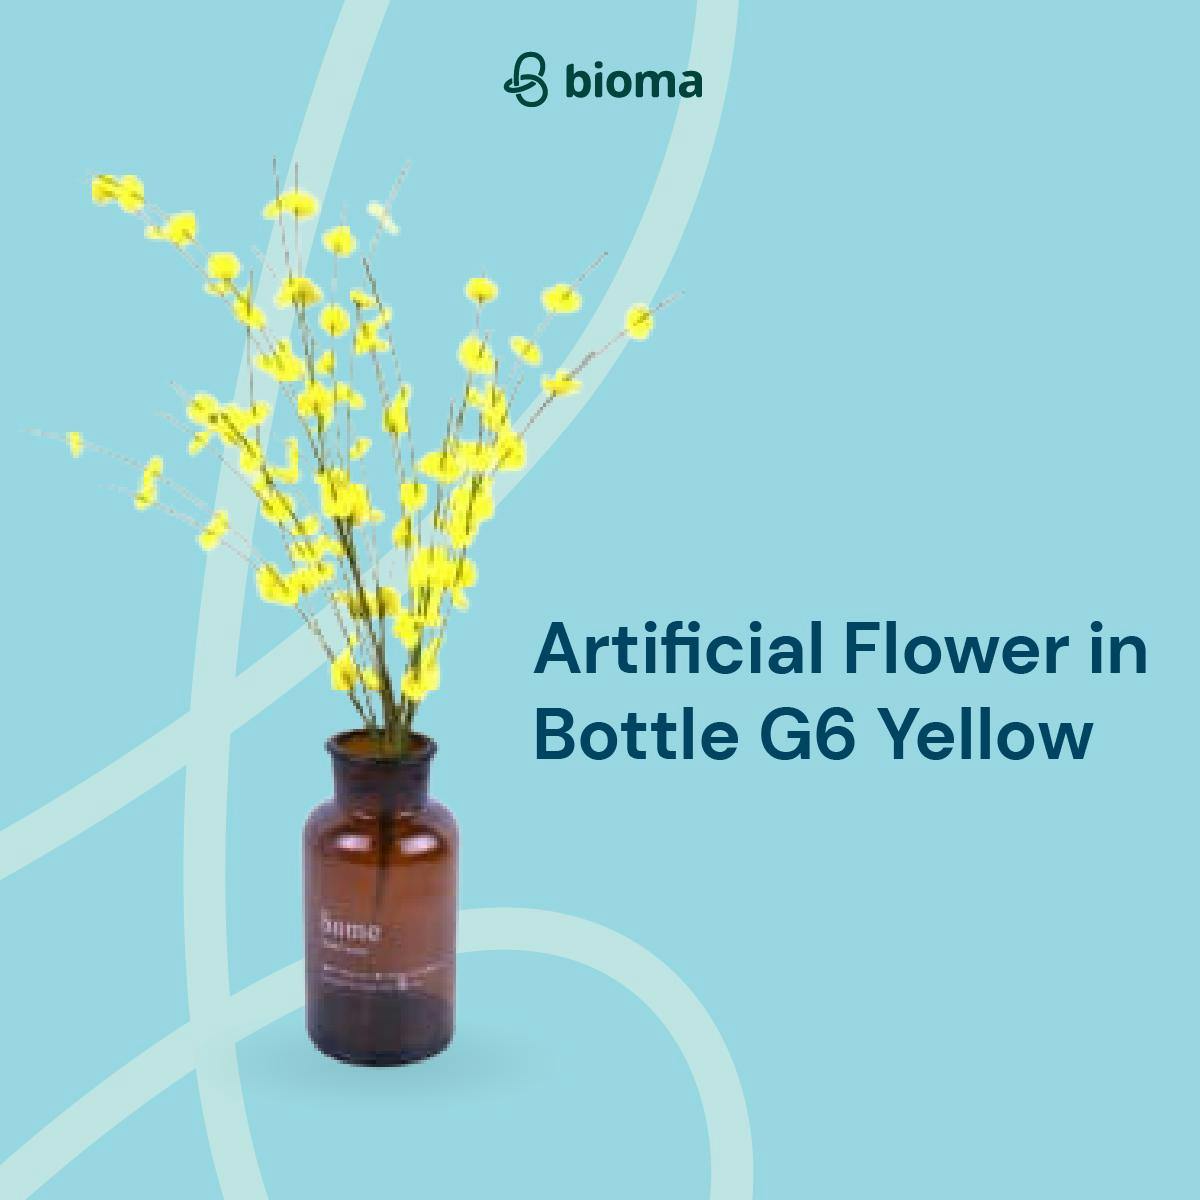 Image 379 Artificial Flower in Bottle G6 Yellow